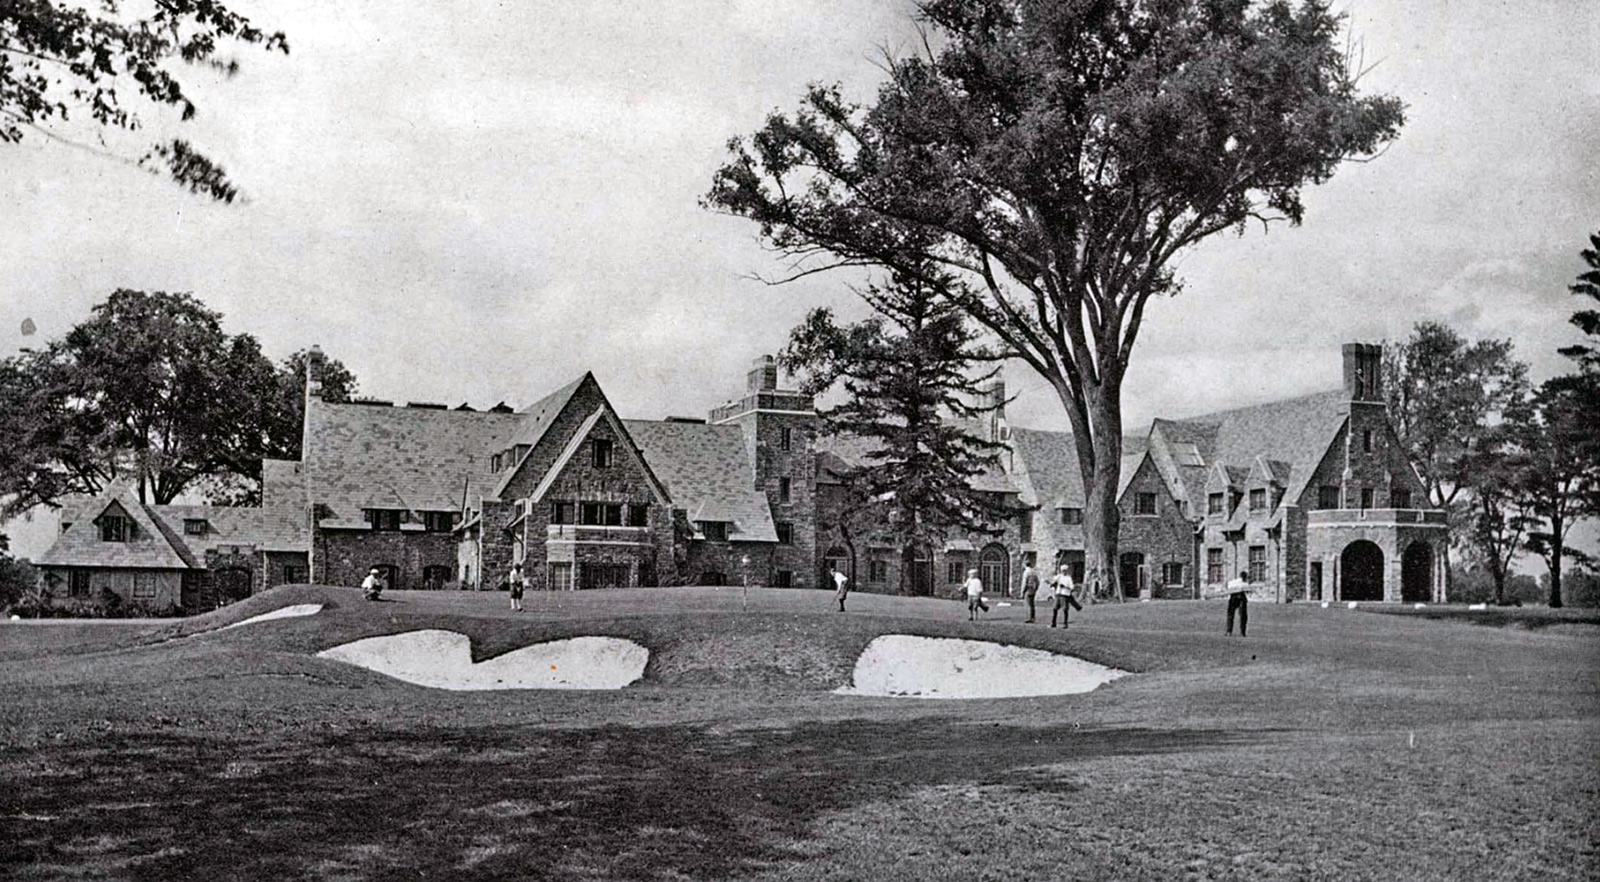 Winged Foot Golf Club as it appeared in 1920